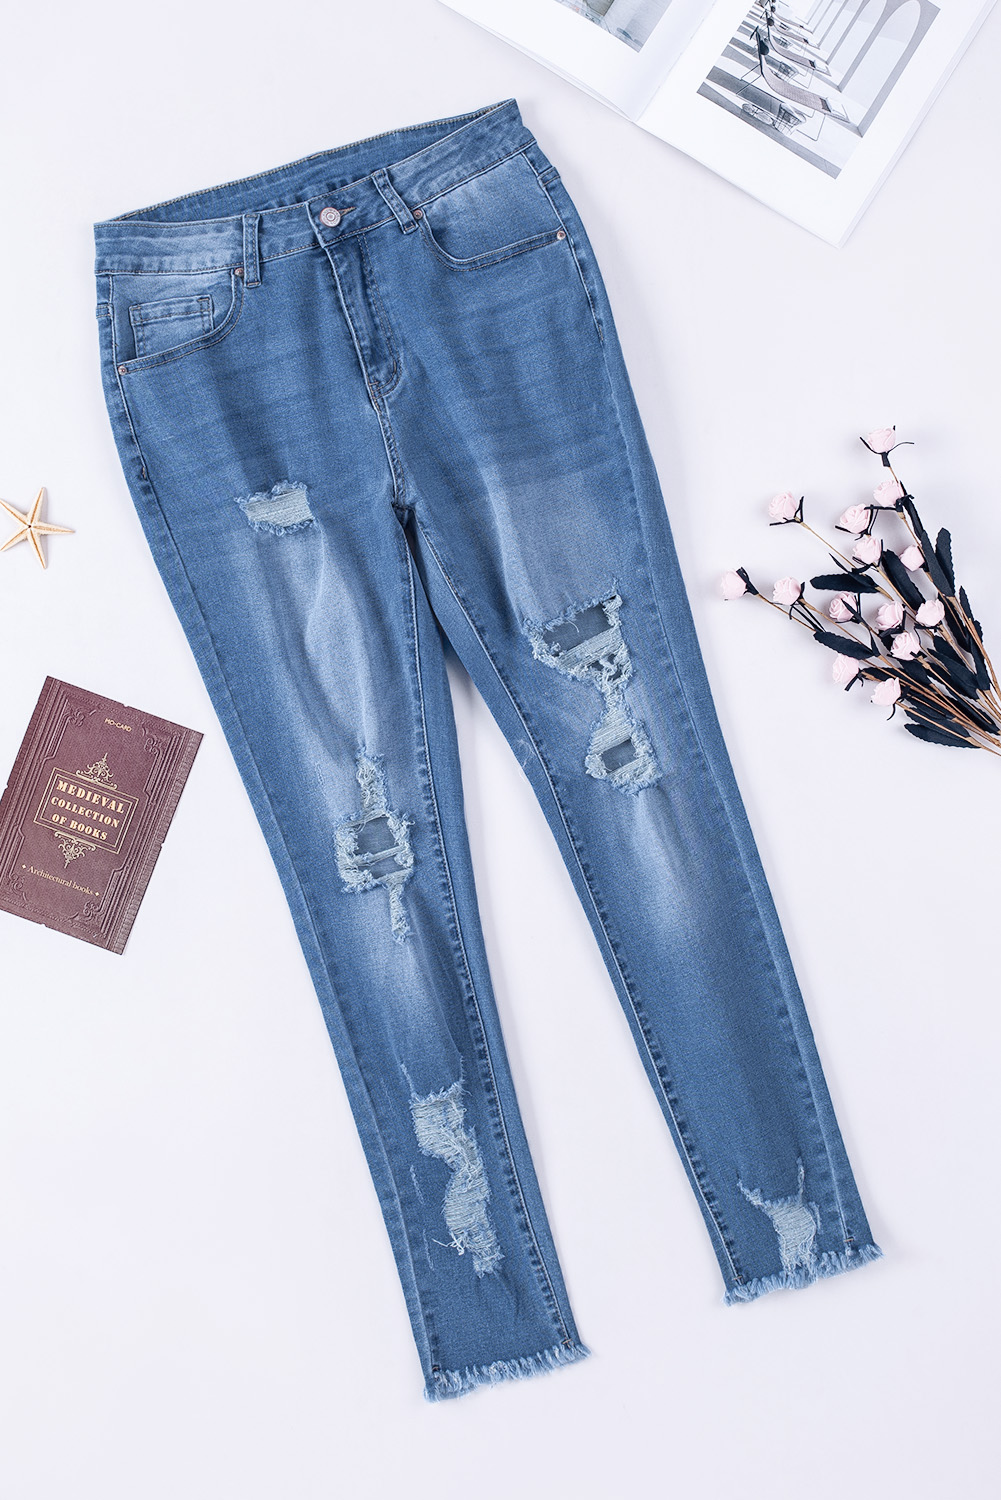 Light Blue High Waist Distressed Skinny Jeans | Shewin Wholesale